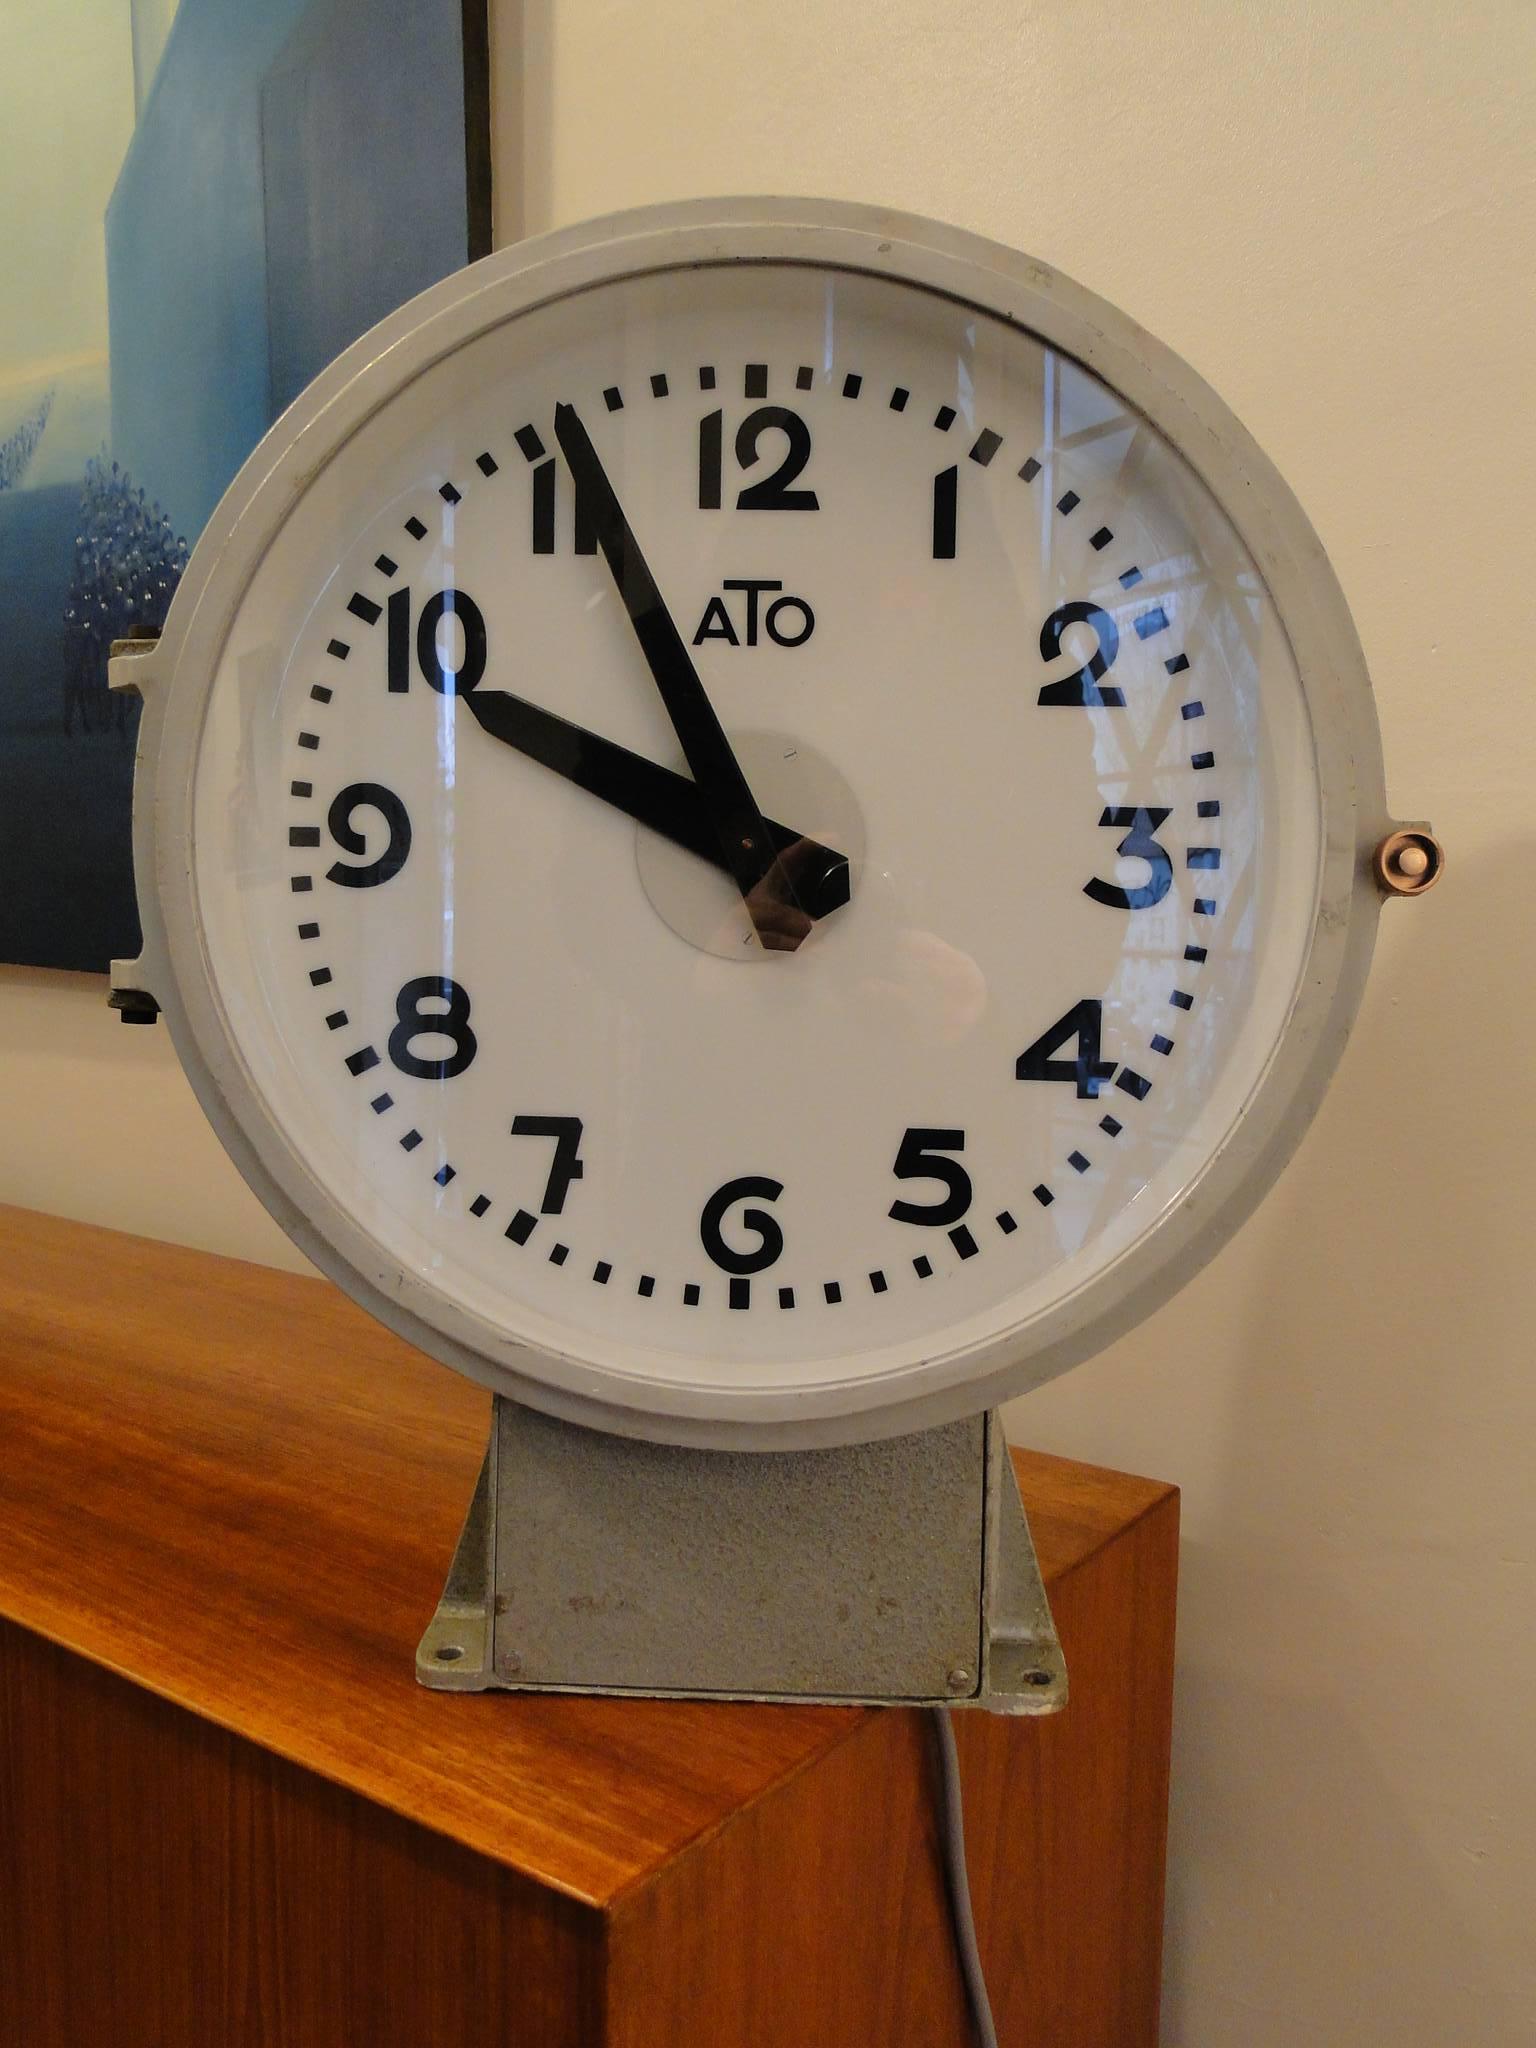 Vintage French station-railway-factory Ato clock. One side with glass and lighting. The frame is made of aluminium. This famous clock measures 19.7